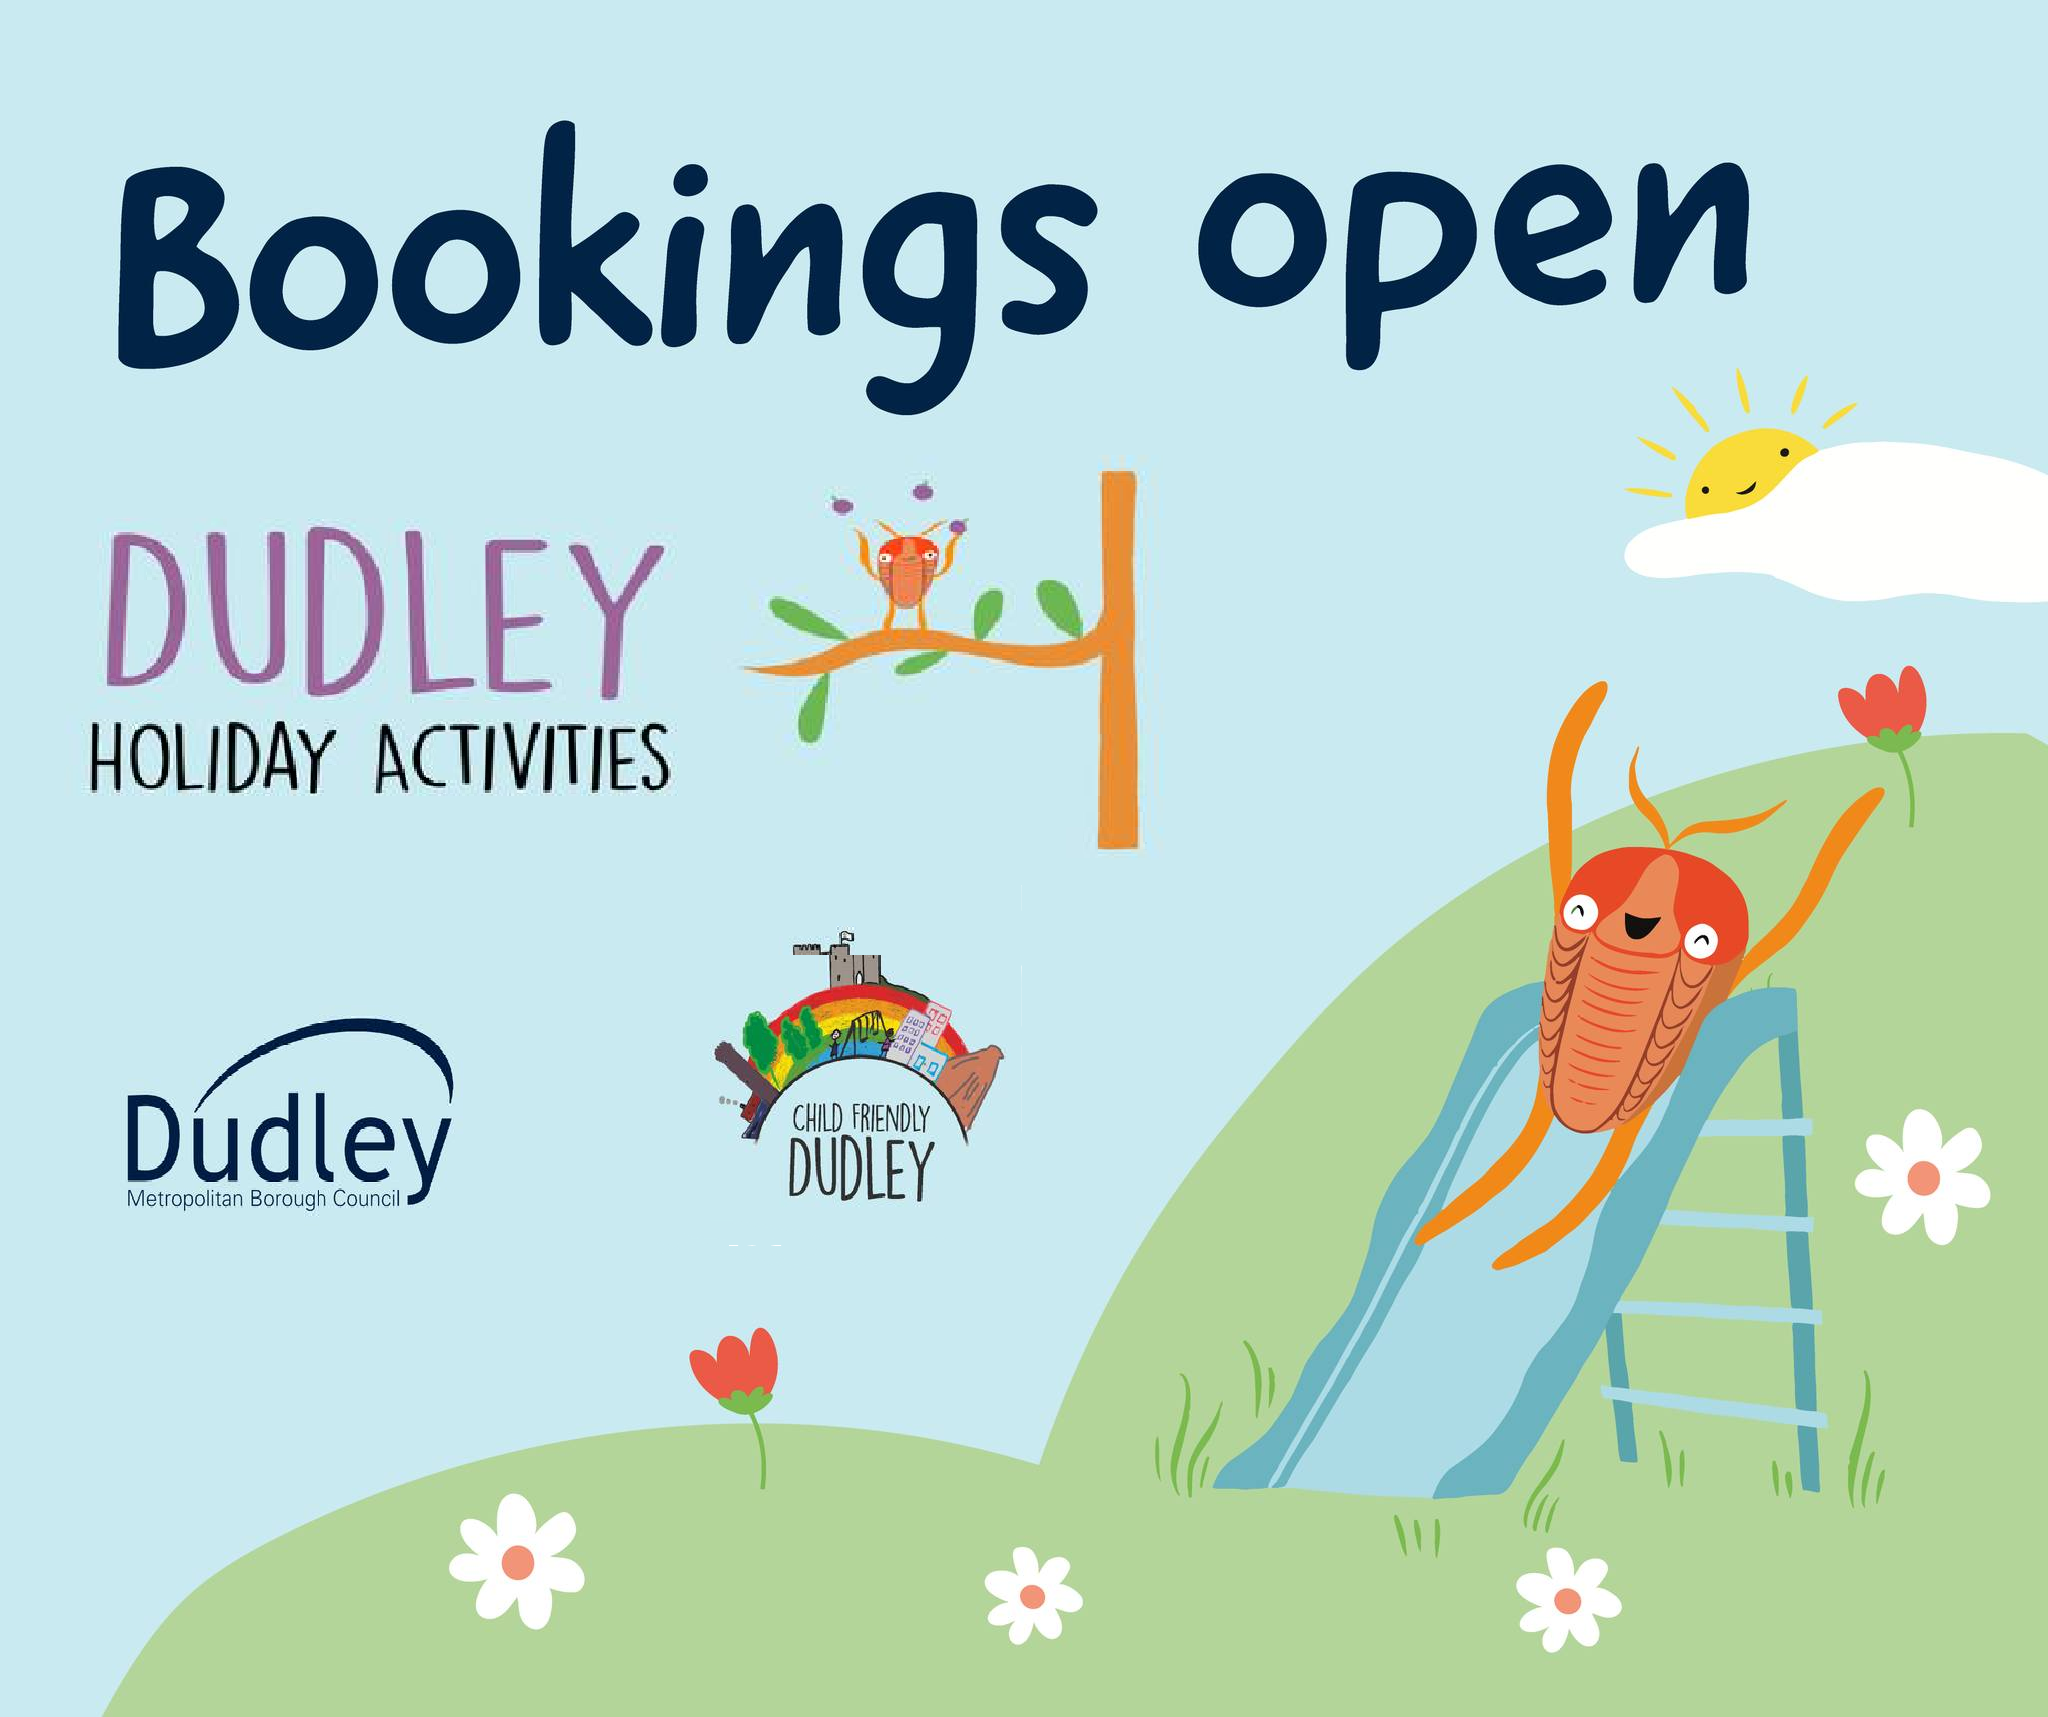 Dudley Holiday Activities